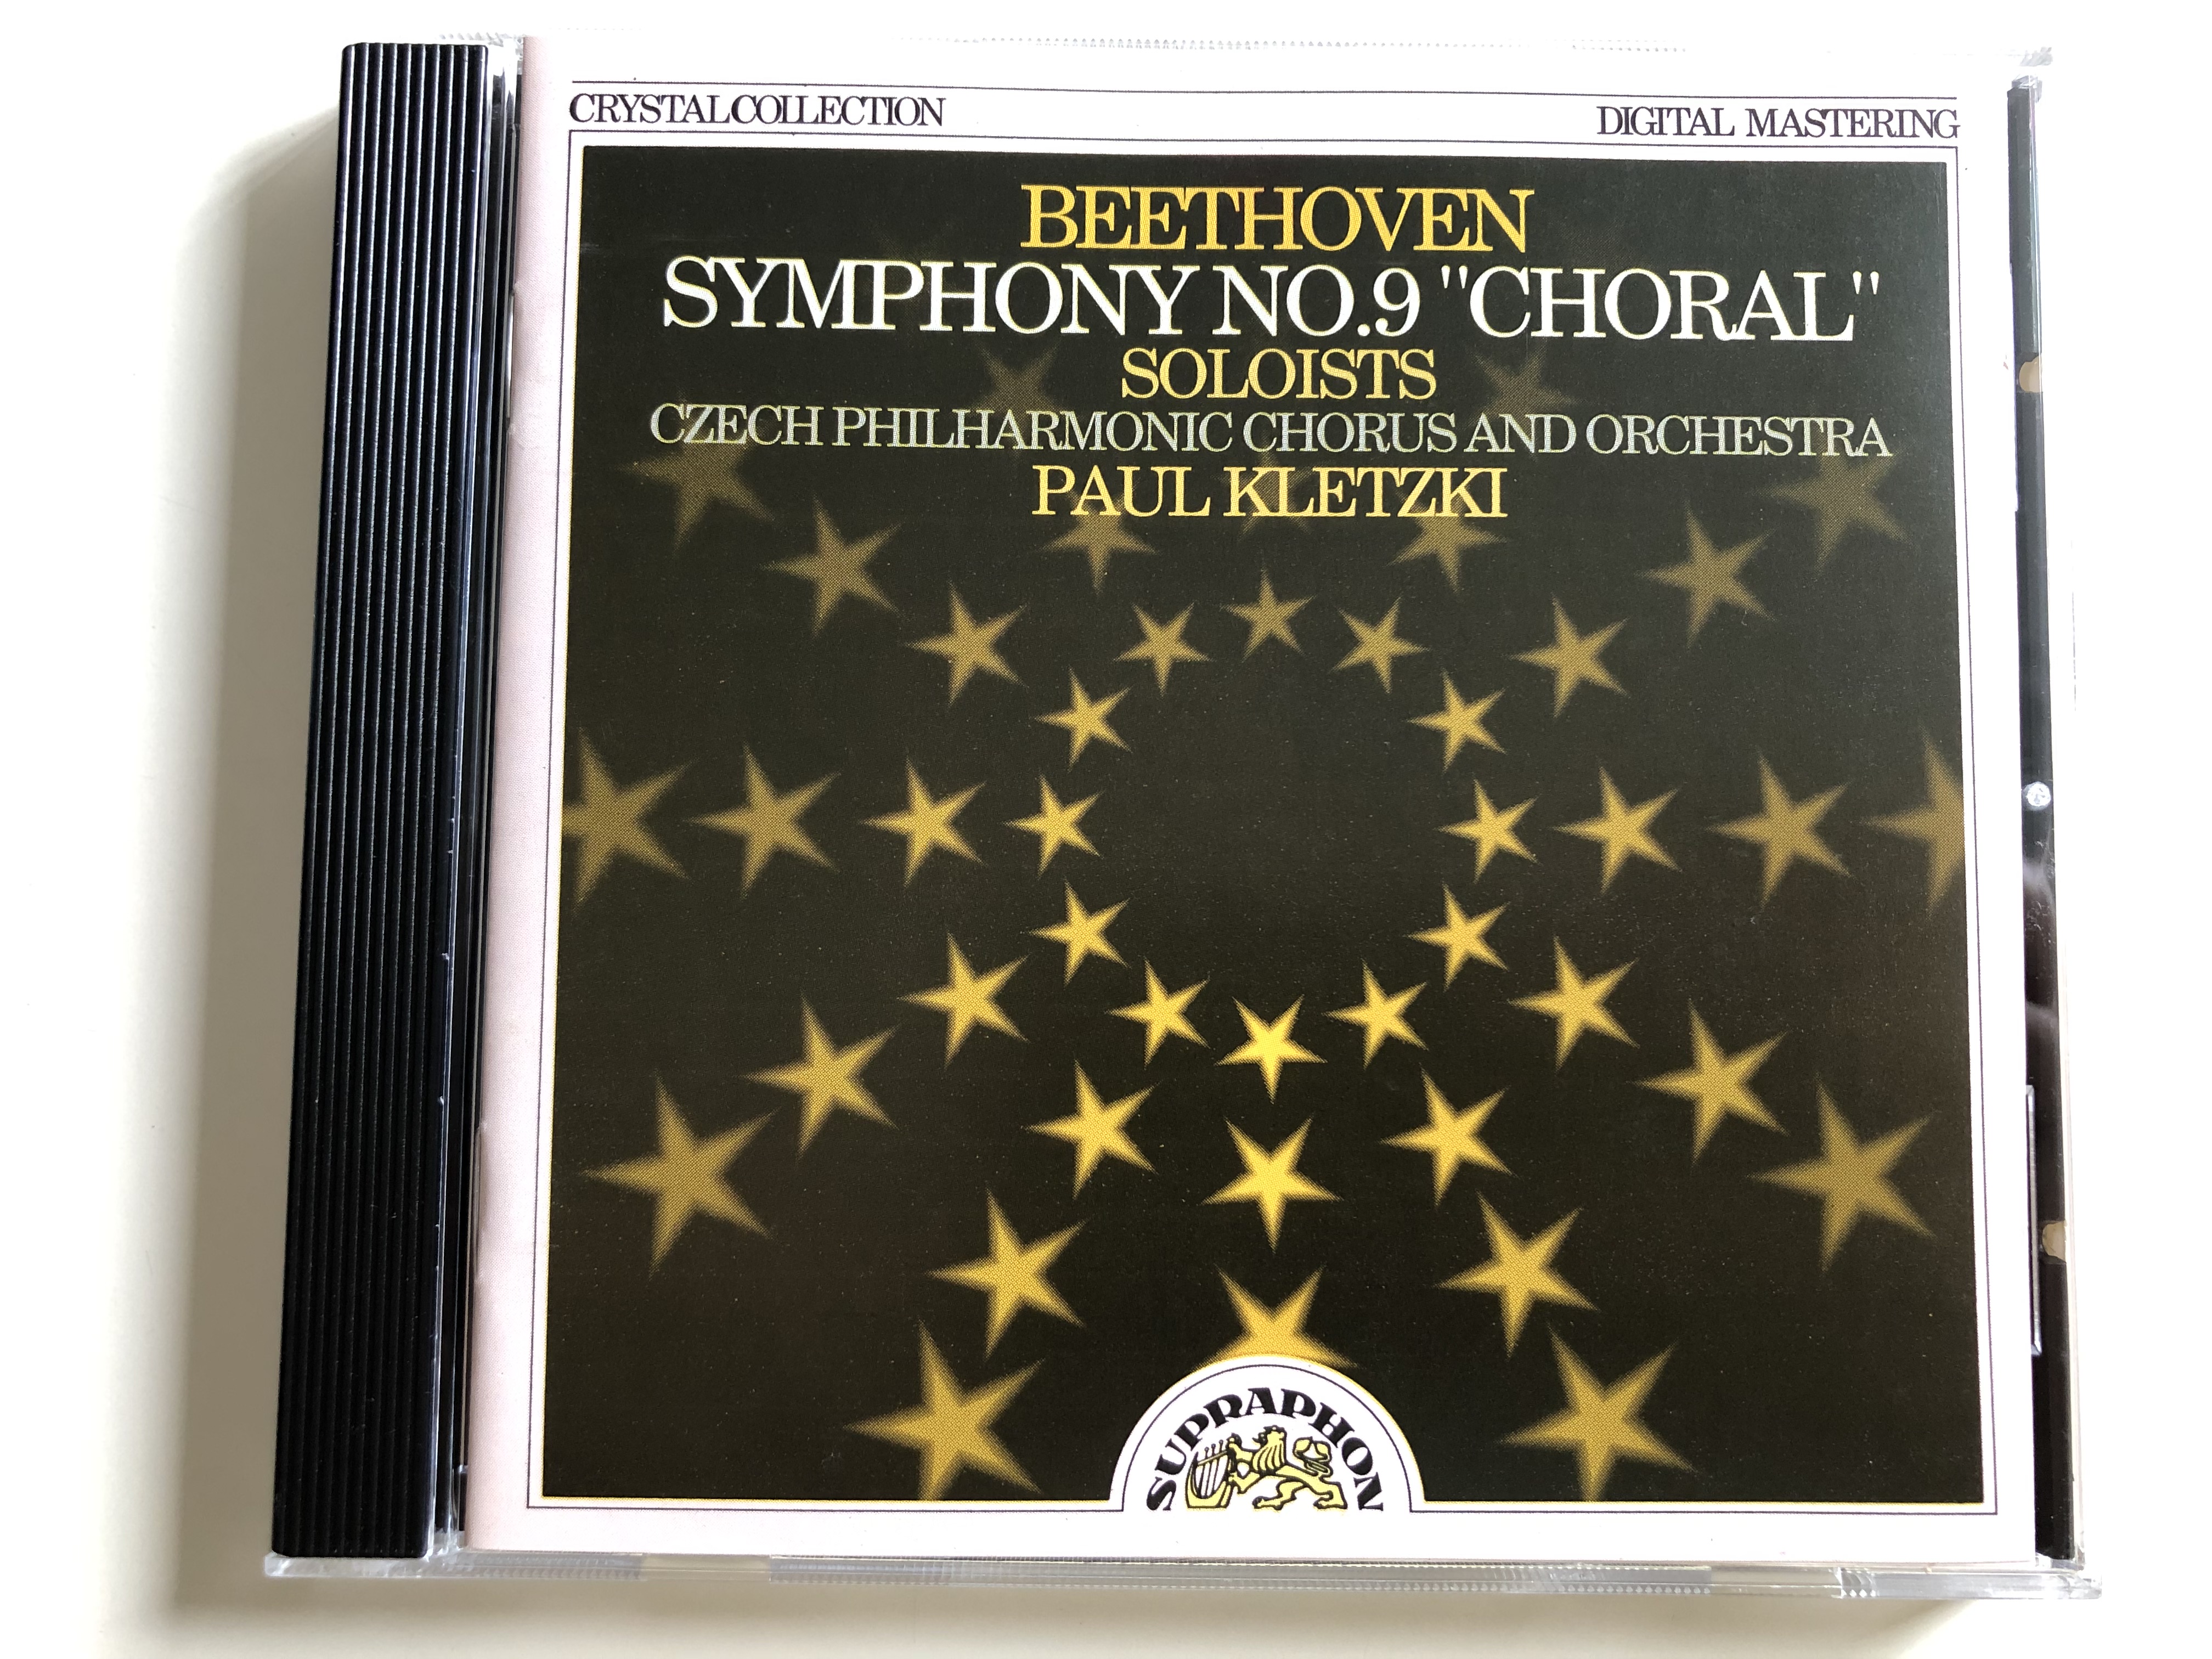 beethoven-symphony-no.-9-choral-soloists-czech-philharmonic-chorus-and-orchestra-conducted-by-paul-kletzki-crystal-colletion-supraphon-audio-cd-1991-1-.jpg